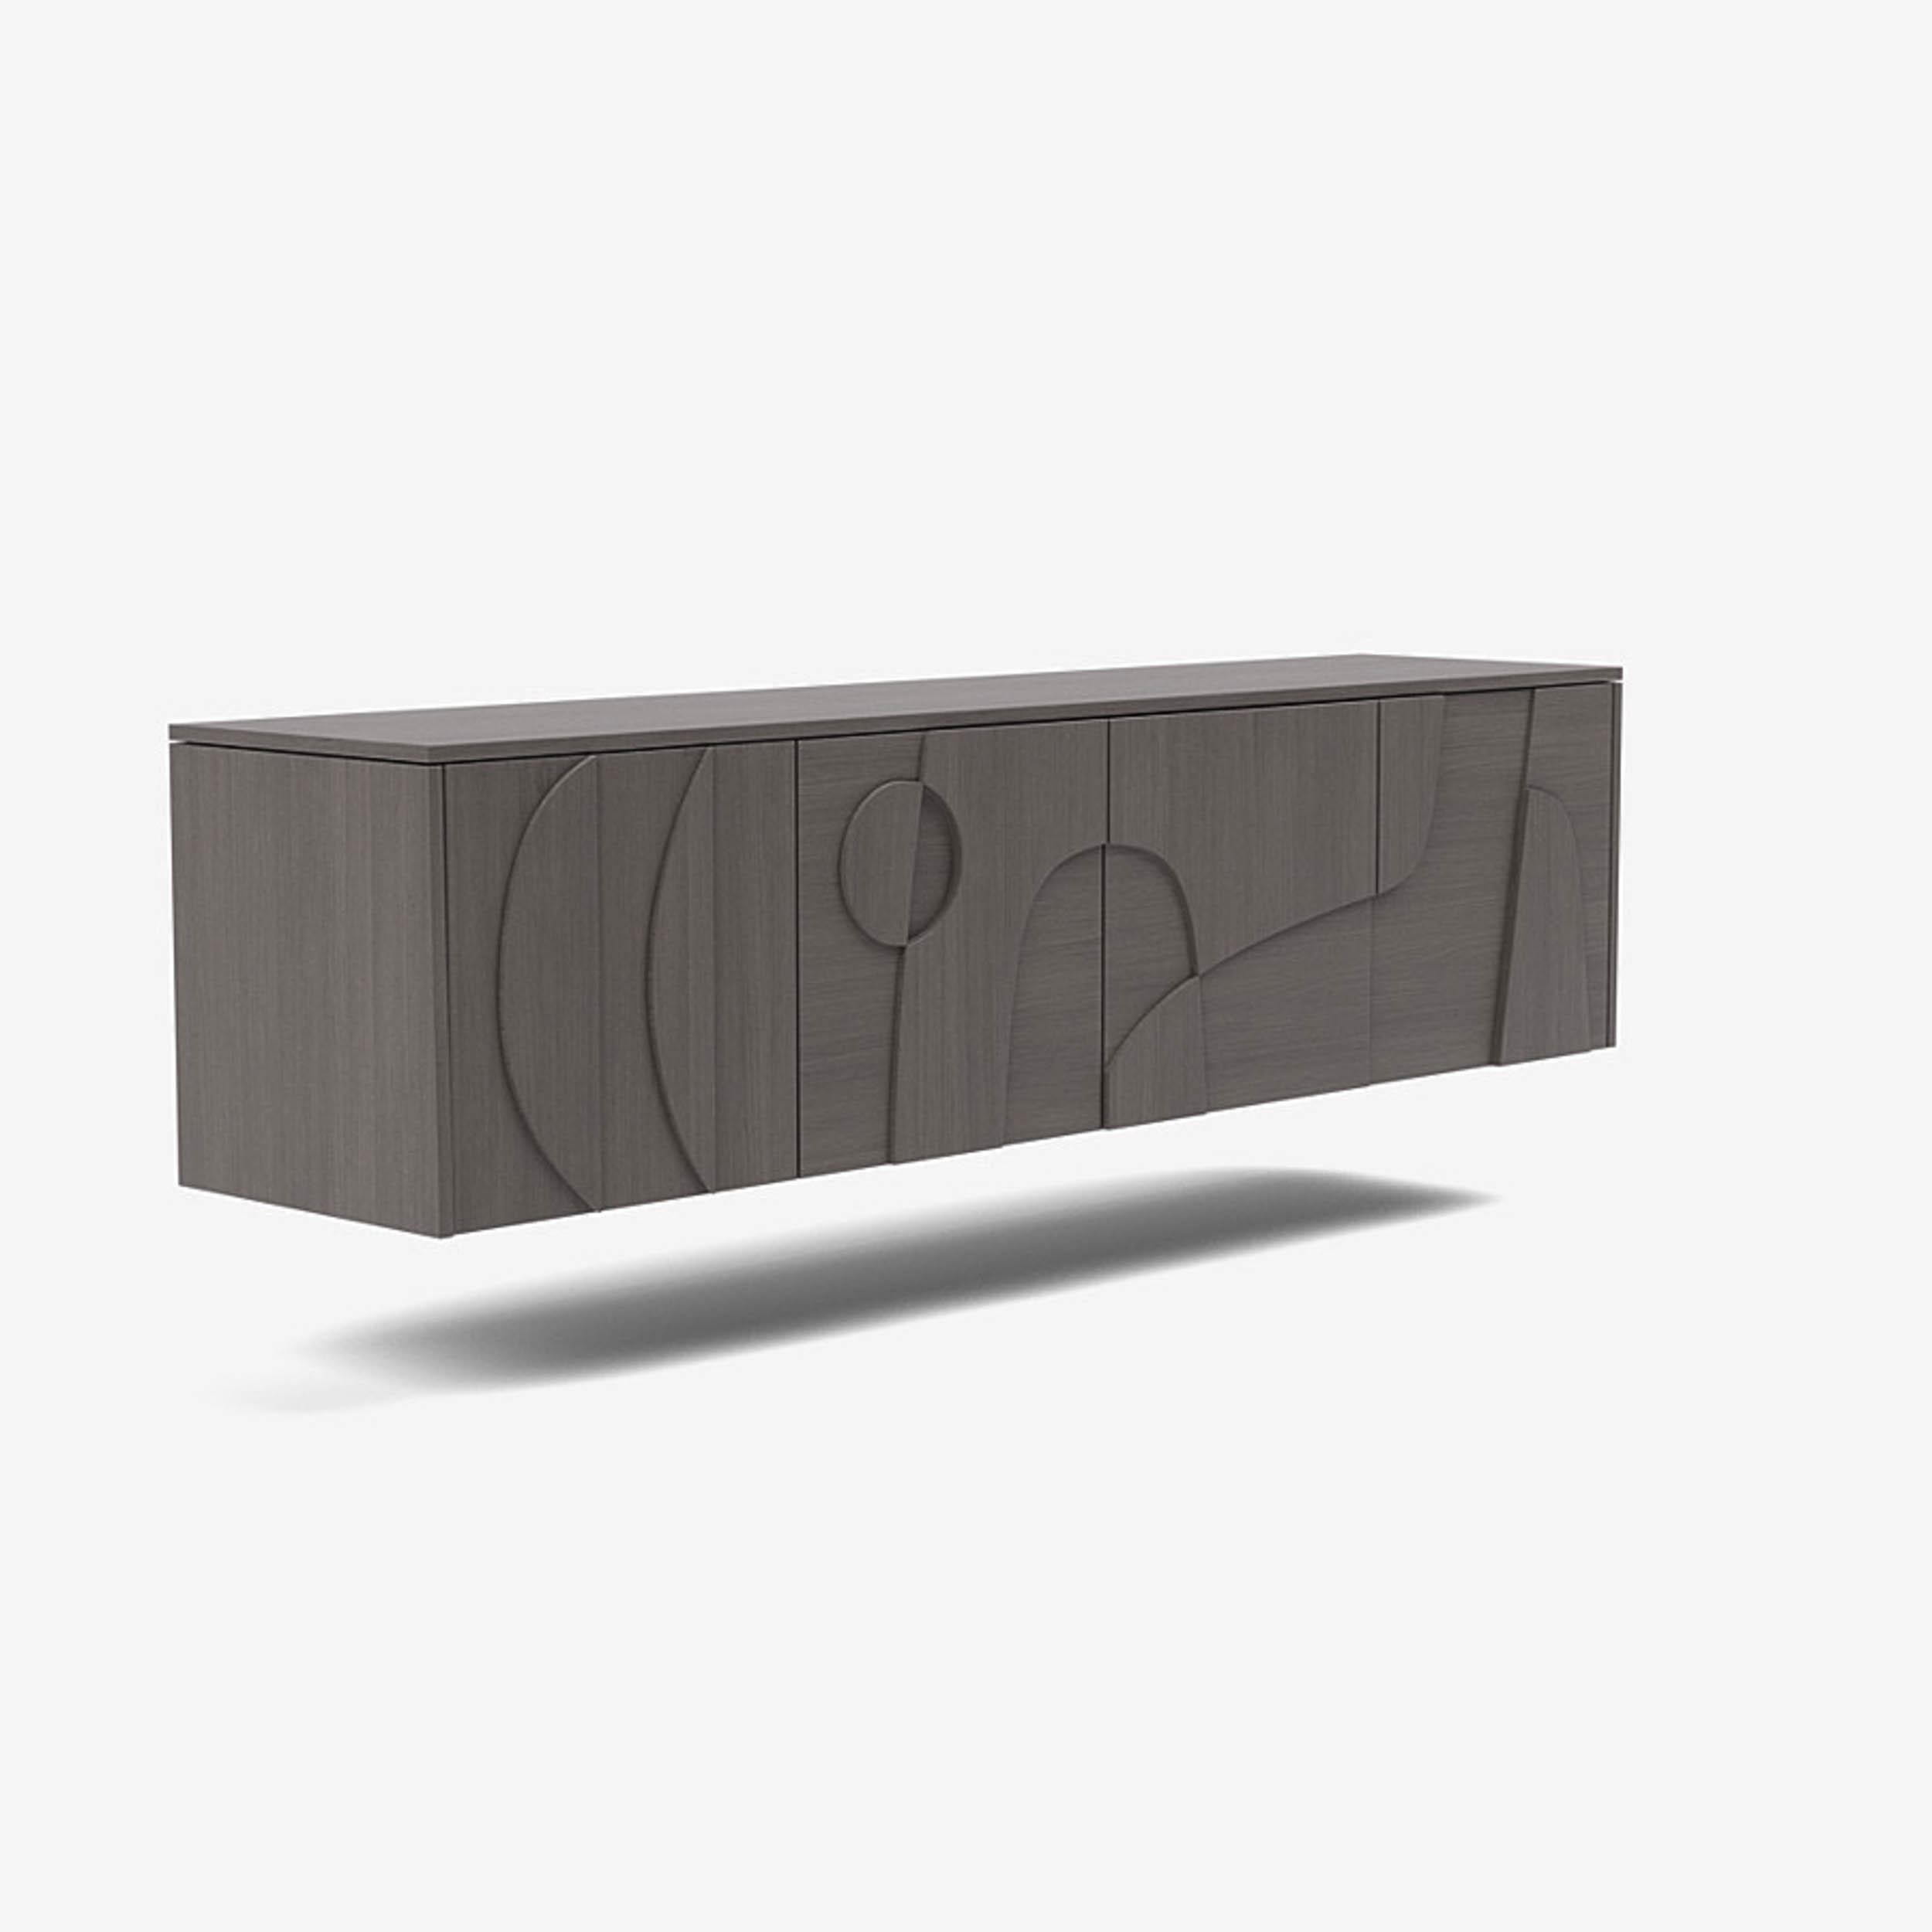 Contemporary 'Wynwood' 4 Sideboard by Man of Parts, Nude Oak, Short Legs For Sale 4